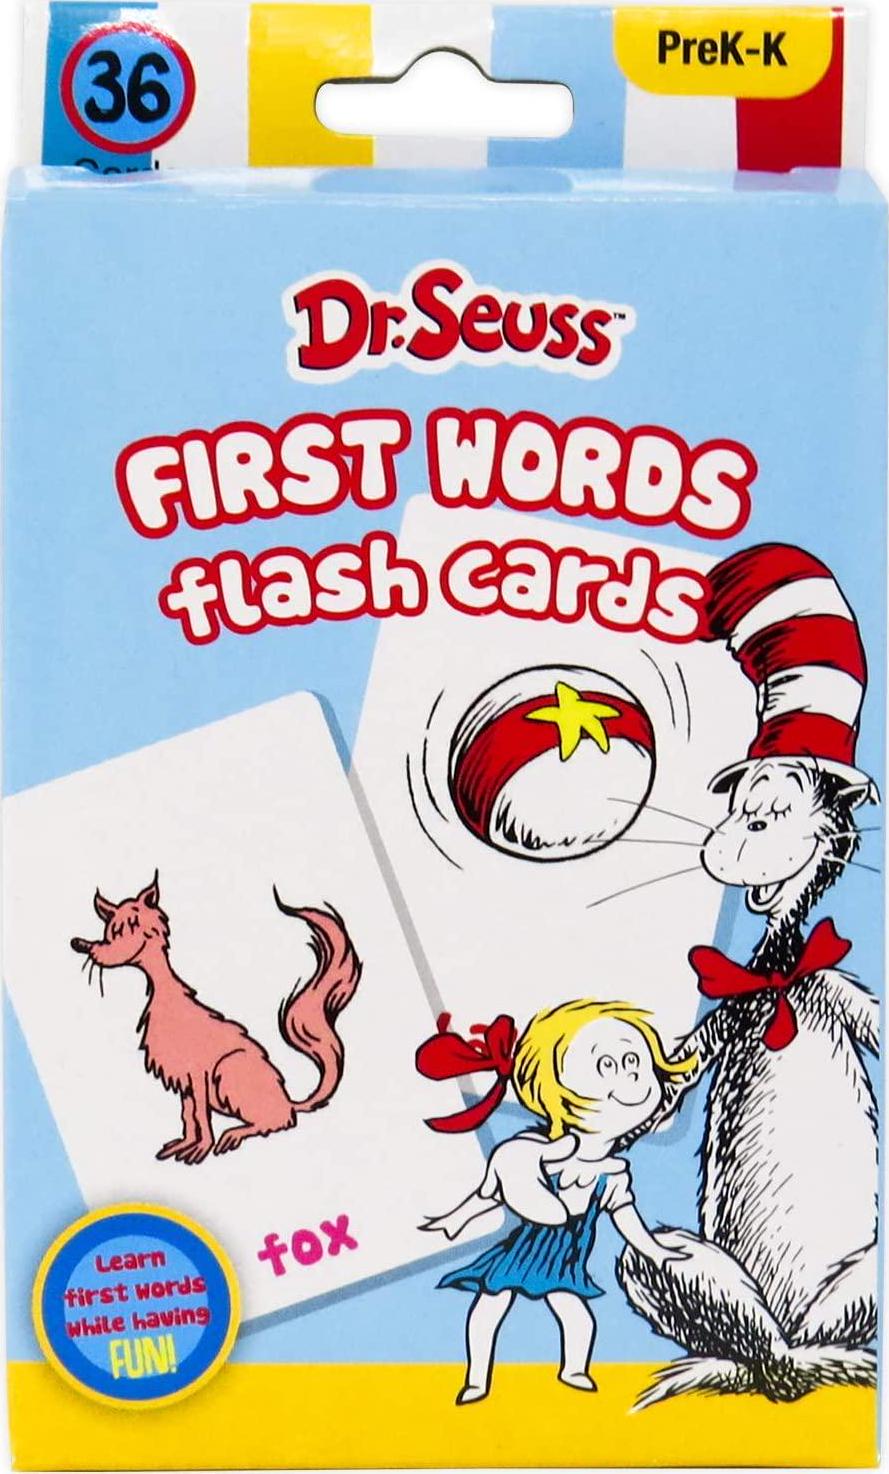 Leap Year Publishing, Leap Year Publishing Dr. Seuss 4-in-1 Educational Flash Cards Value Pack, Pre-K, Kindergarten, Numbers, Alphabet, Colors and Shapes, and First Words